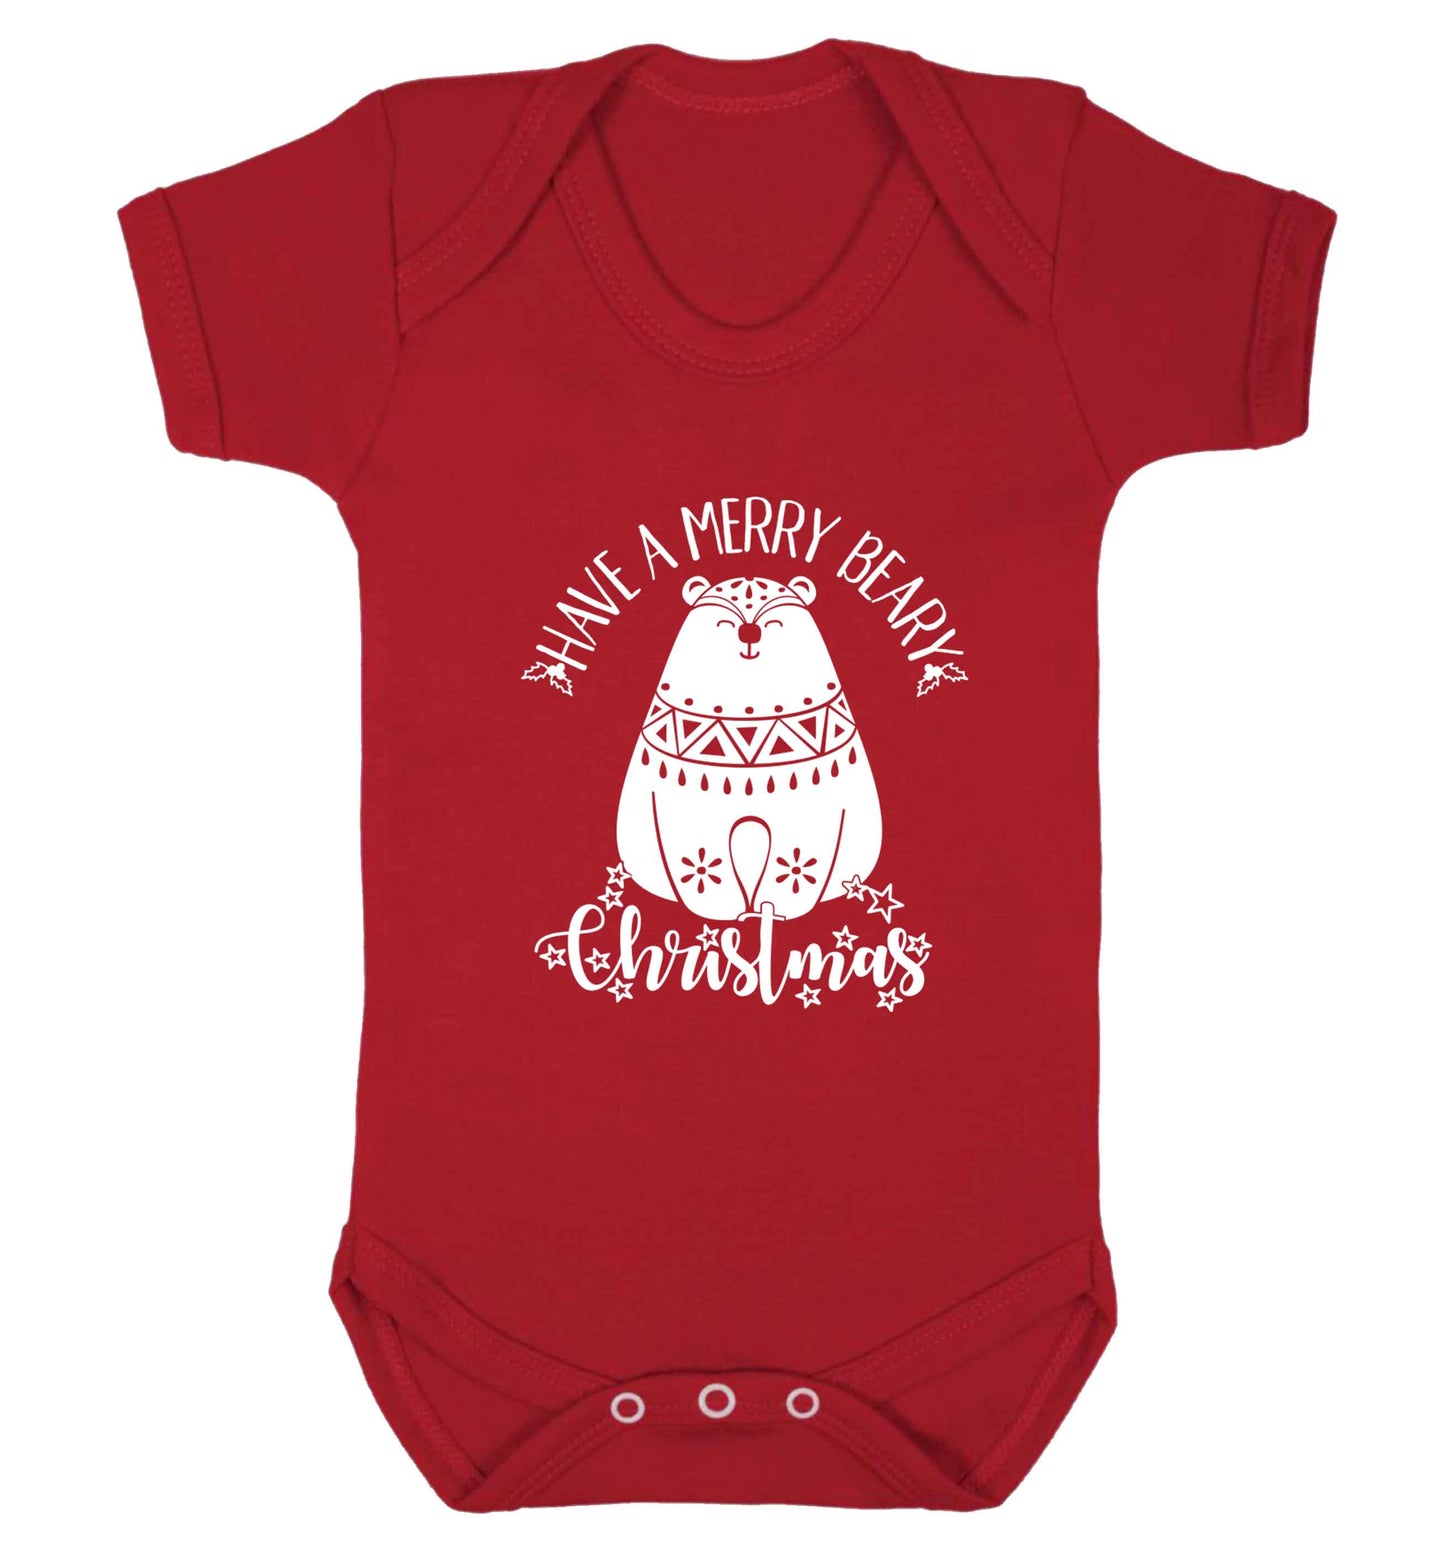 Have a merry beary Christmas Baby Vest red 18-24 months